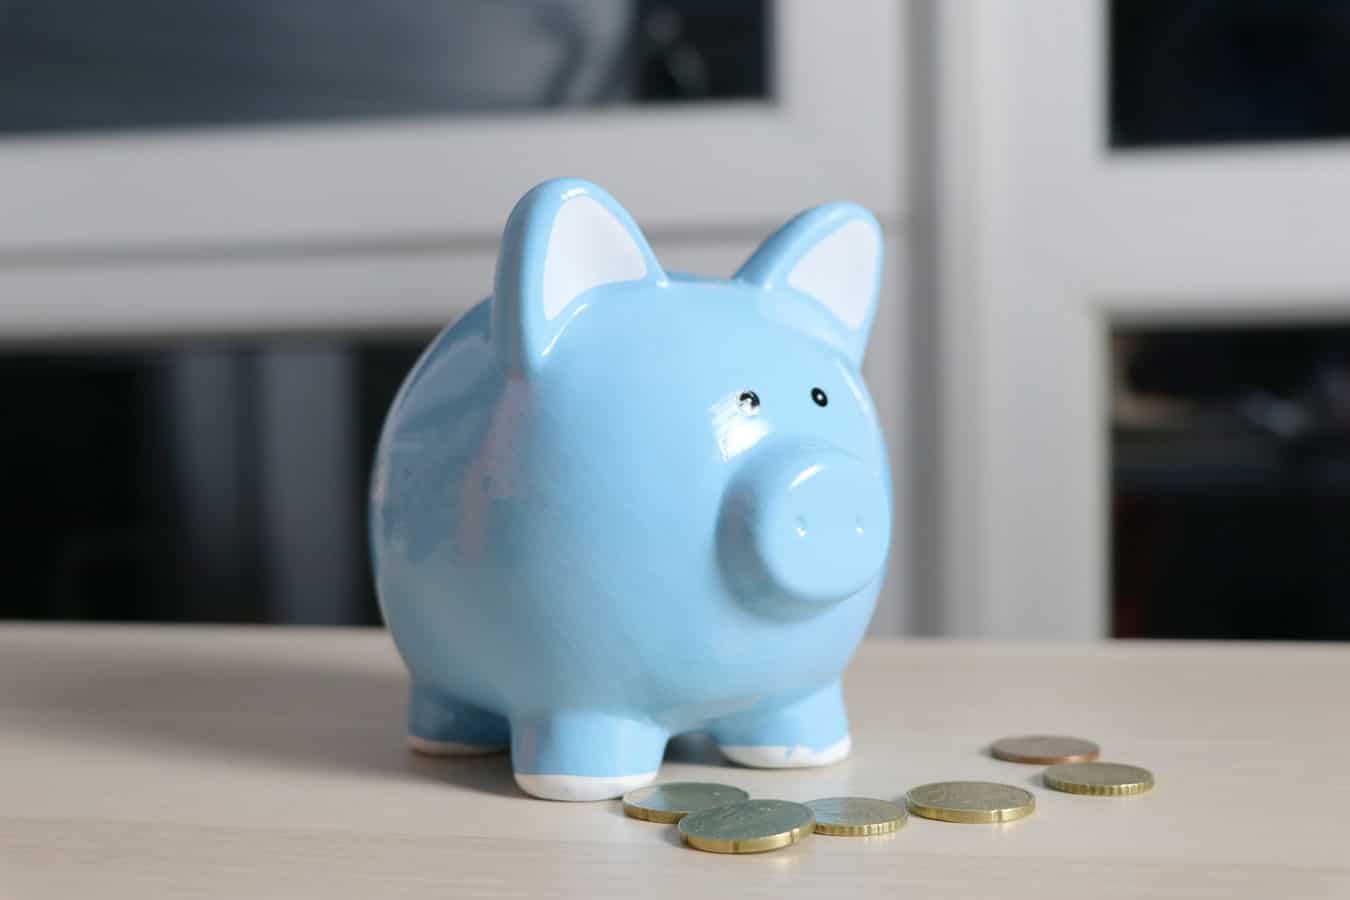 Learn How to Budget with these Nifty Tips!